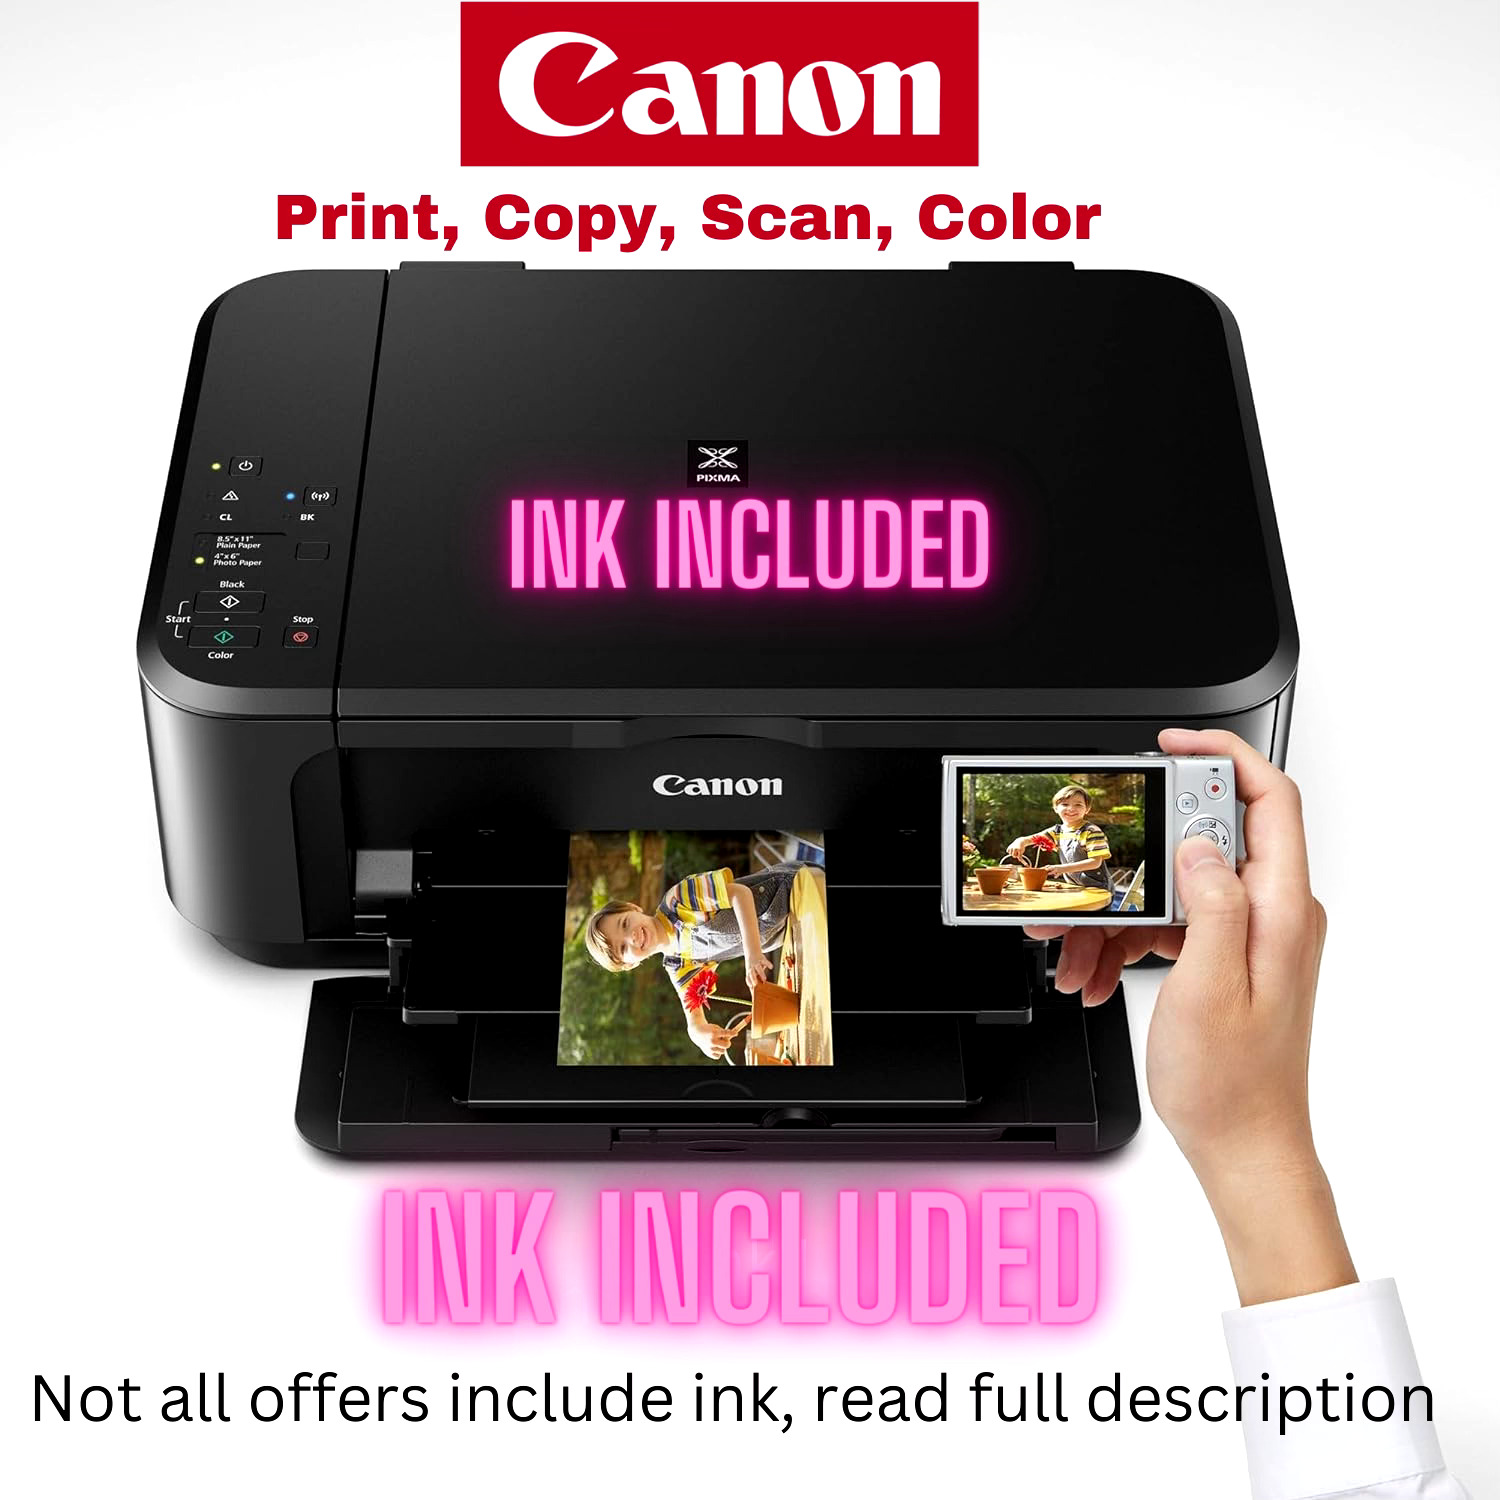 Canon PIXMA MG3620 Wireless All-In-One Color Inkjet Printer with Mobile and Tabl